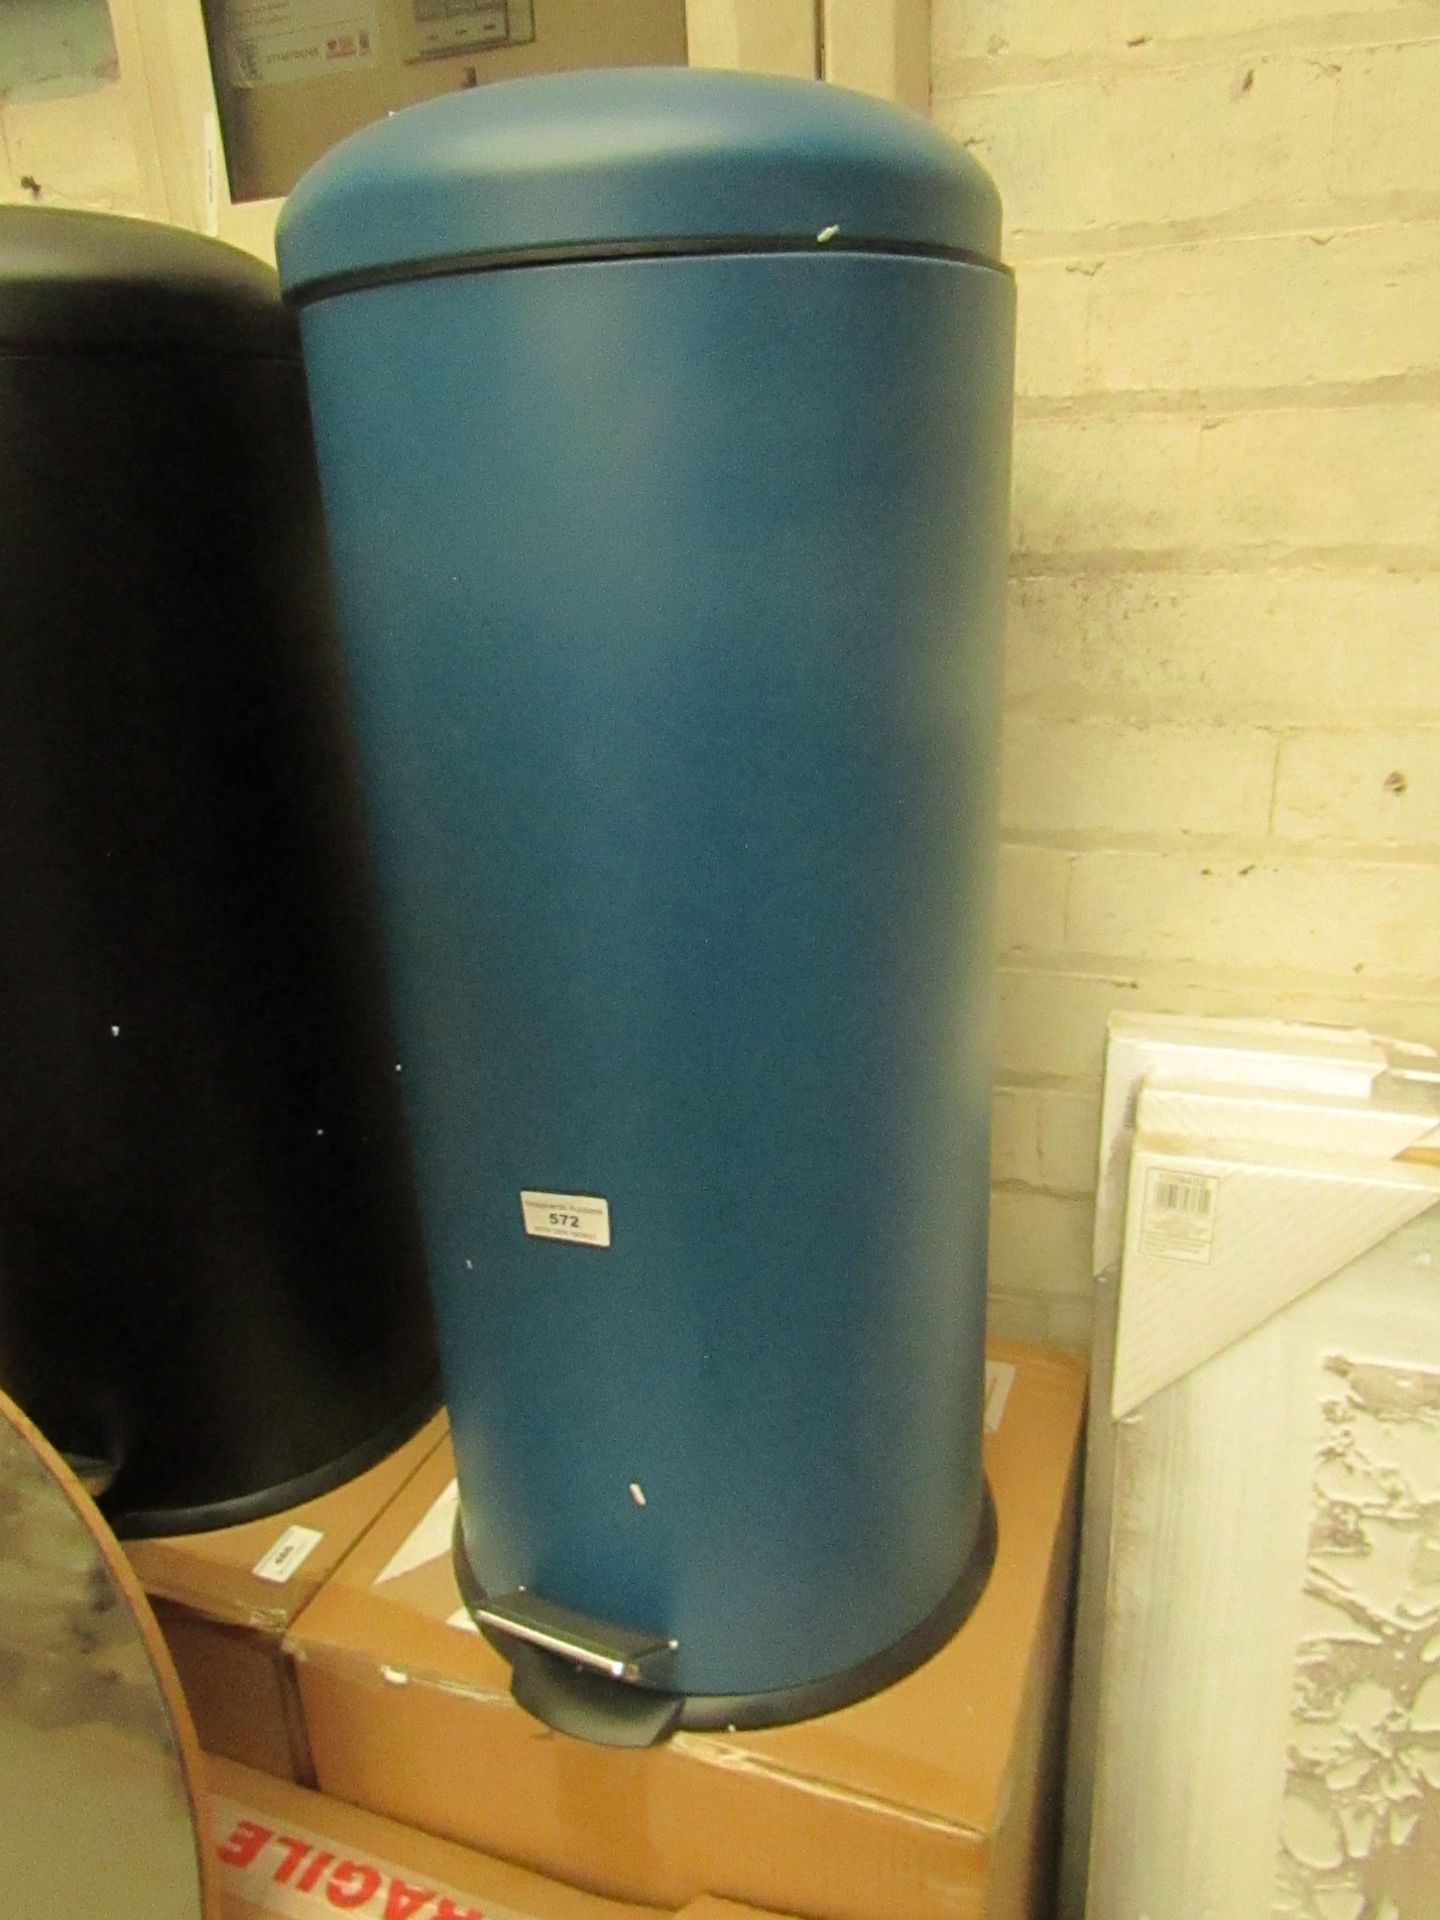 | 1X | MADE.COM JOSS 30L DOMED PEDAL BIN BLUE | MAY HAVE SOME DENTS BUT NOTHIMNG MAJOR & BOXED | SKU